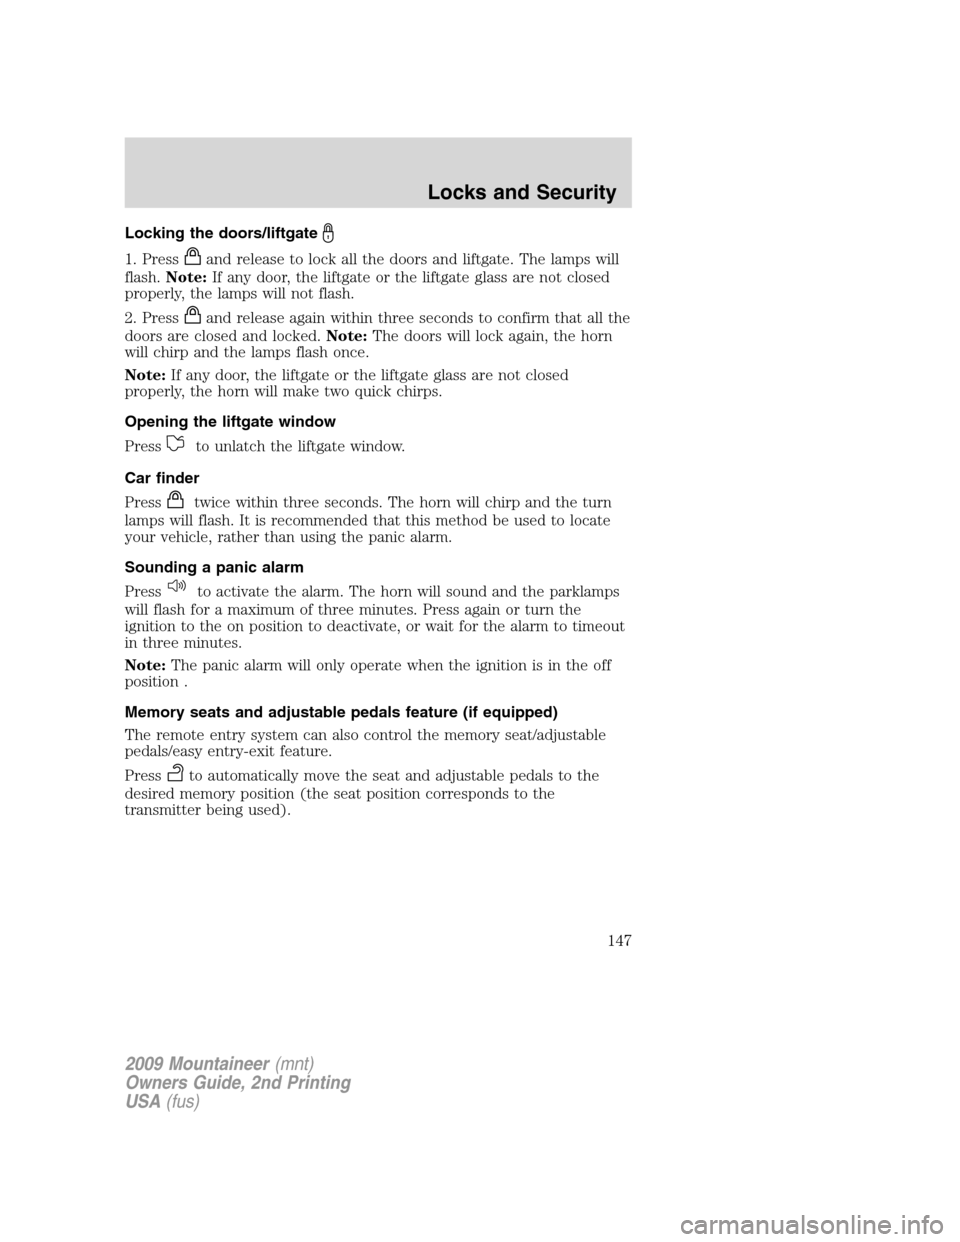 Mercury Mountaineer 2009  Owners Manuals Locking the doors/liftgate
1. Pressand release to lock all the doors and liftgate. The lamps will
flash.Note:If any door, the liftgate or the liftgate glass are not closed
properly, the lamps will not